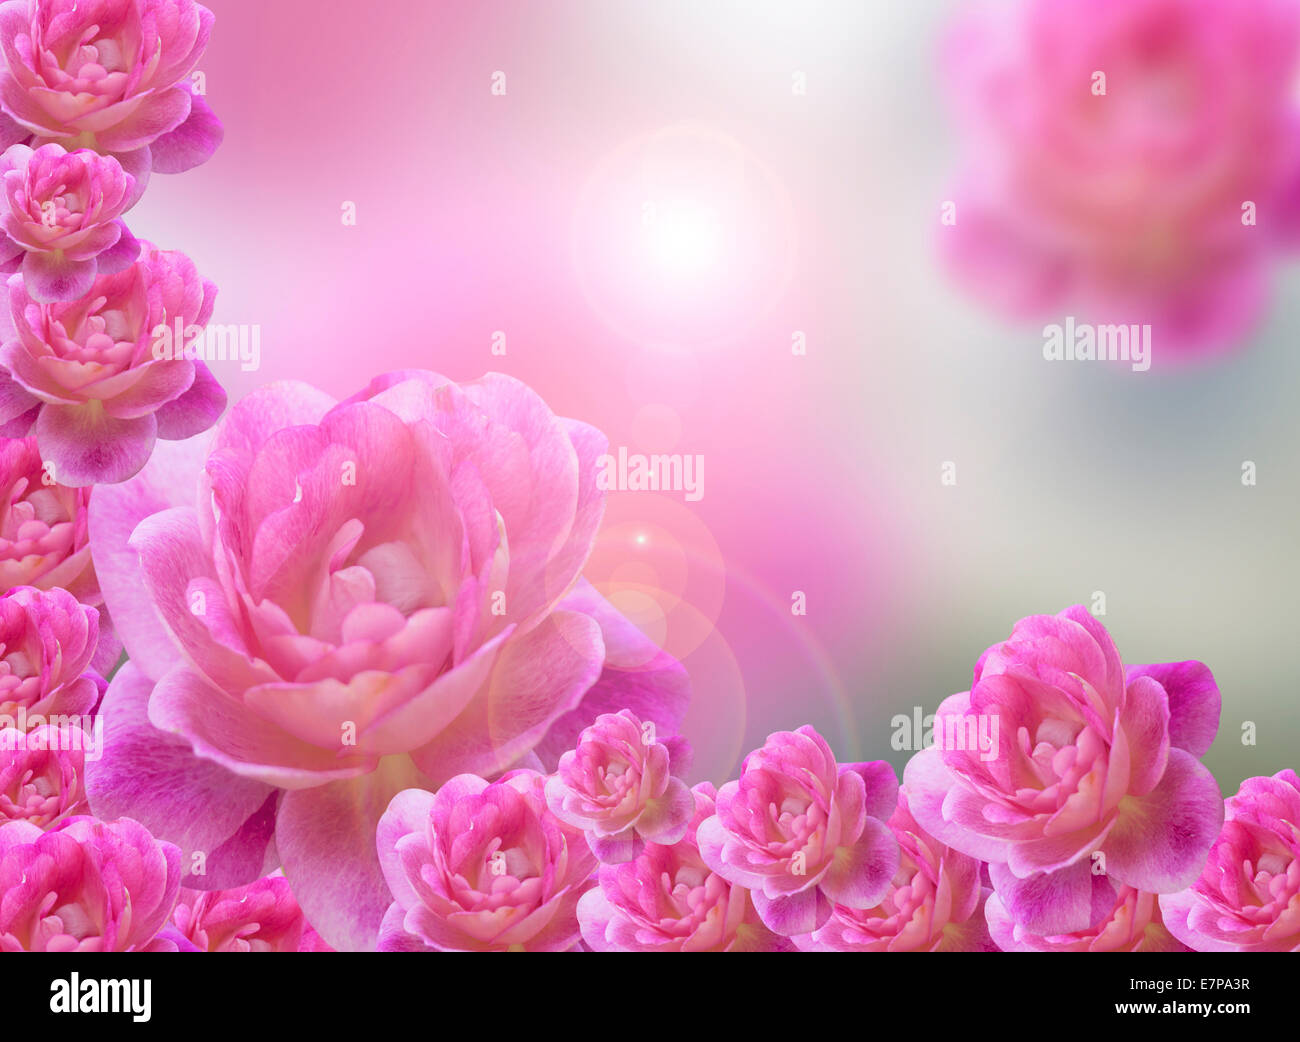 Pink roses background represents the abstract nature of love Stock Photo -  Alamy